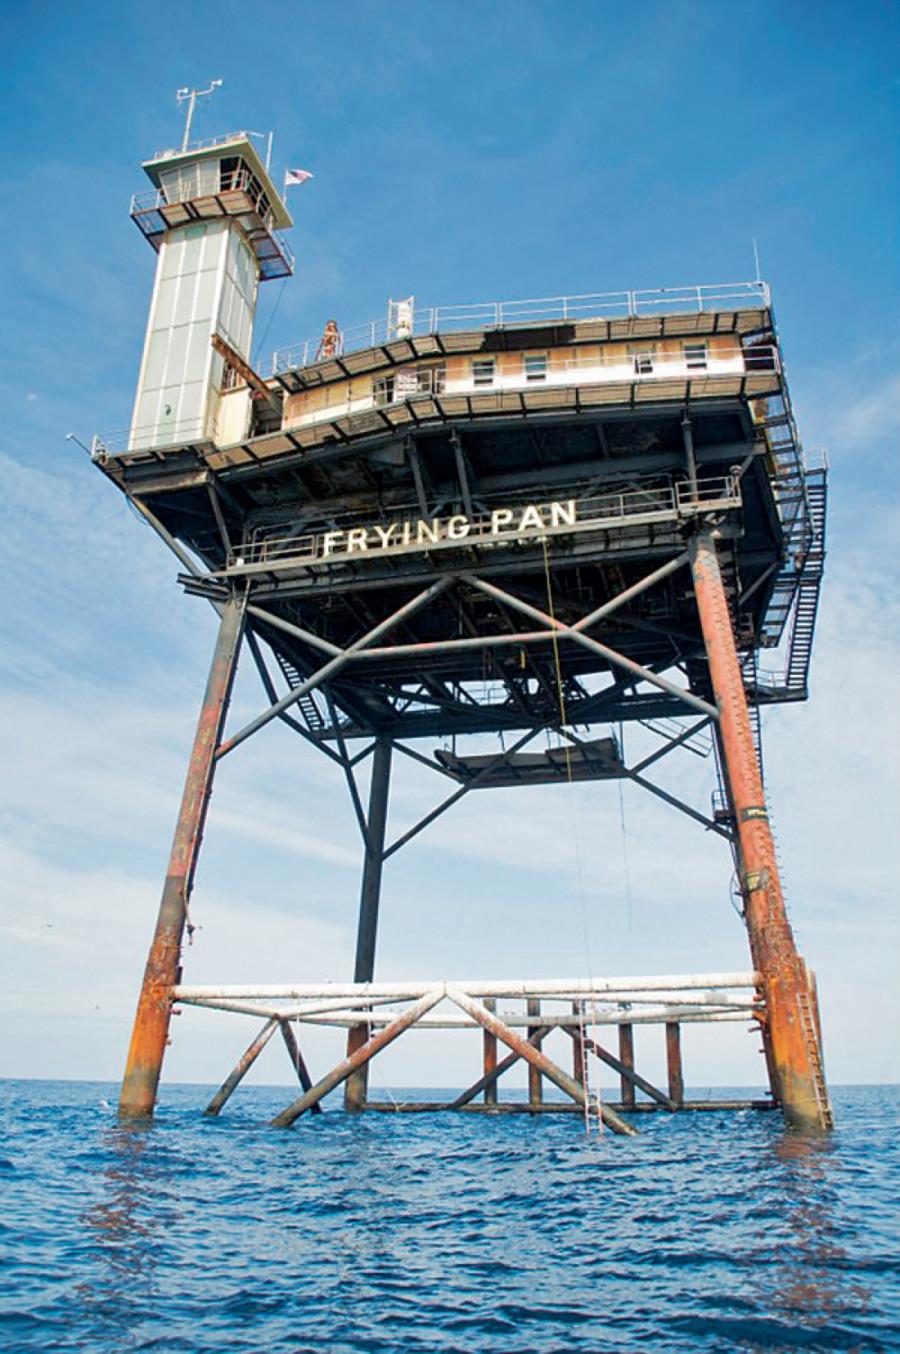 Frying Pan Tower - Light Station - Aerial view